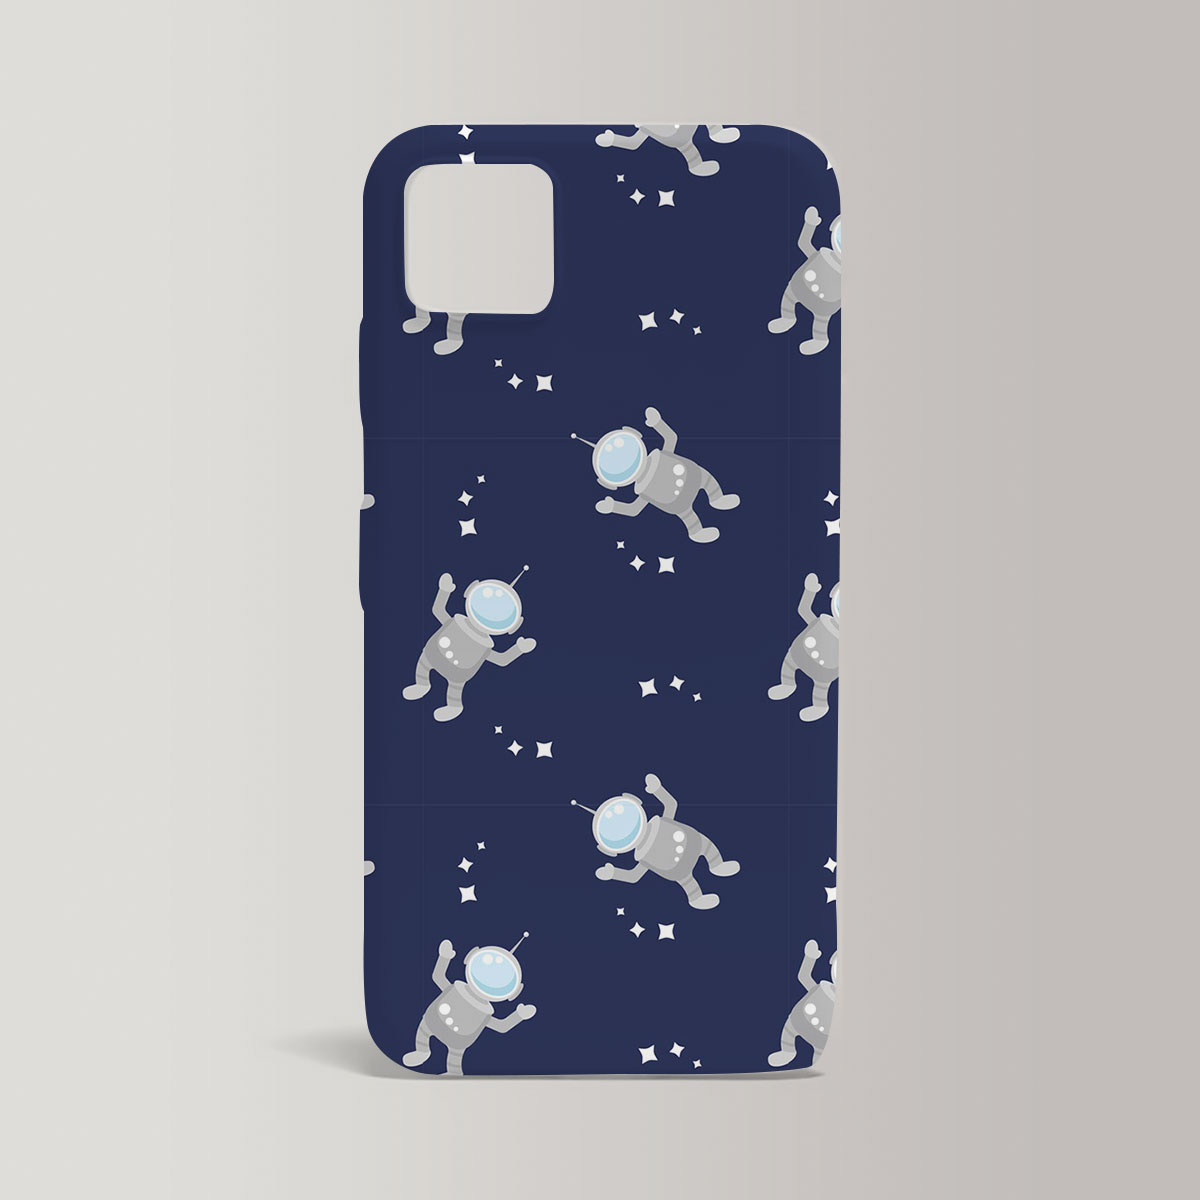 Astronauts Characters Iphone Case